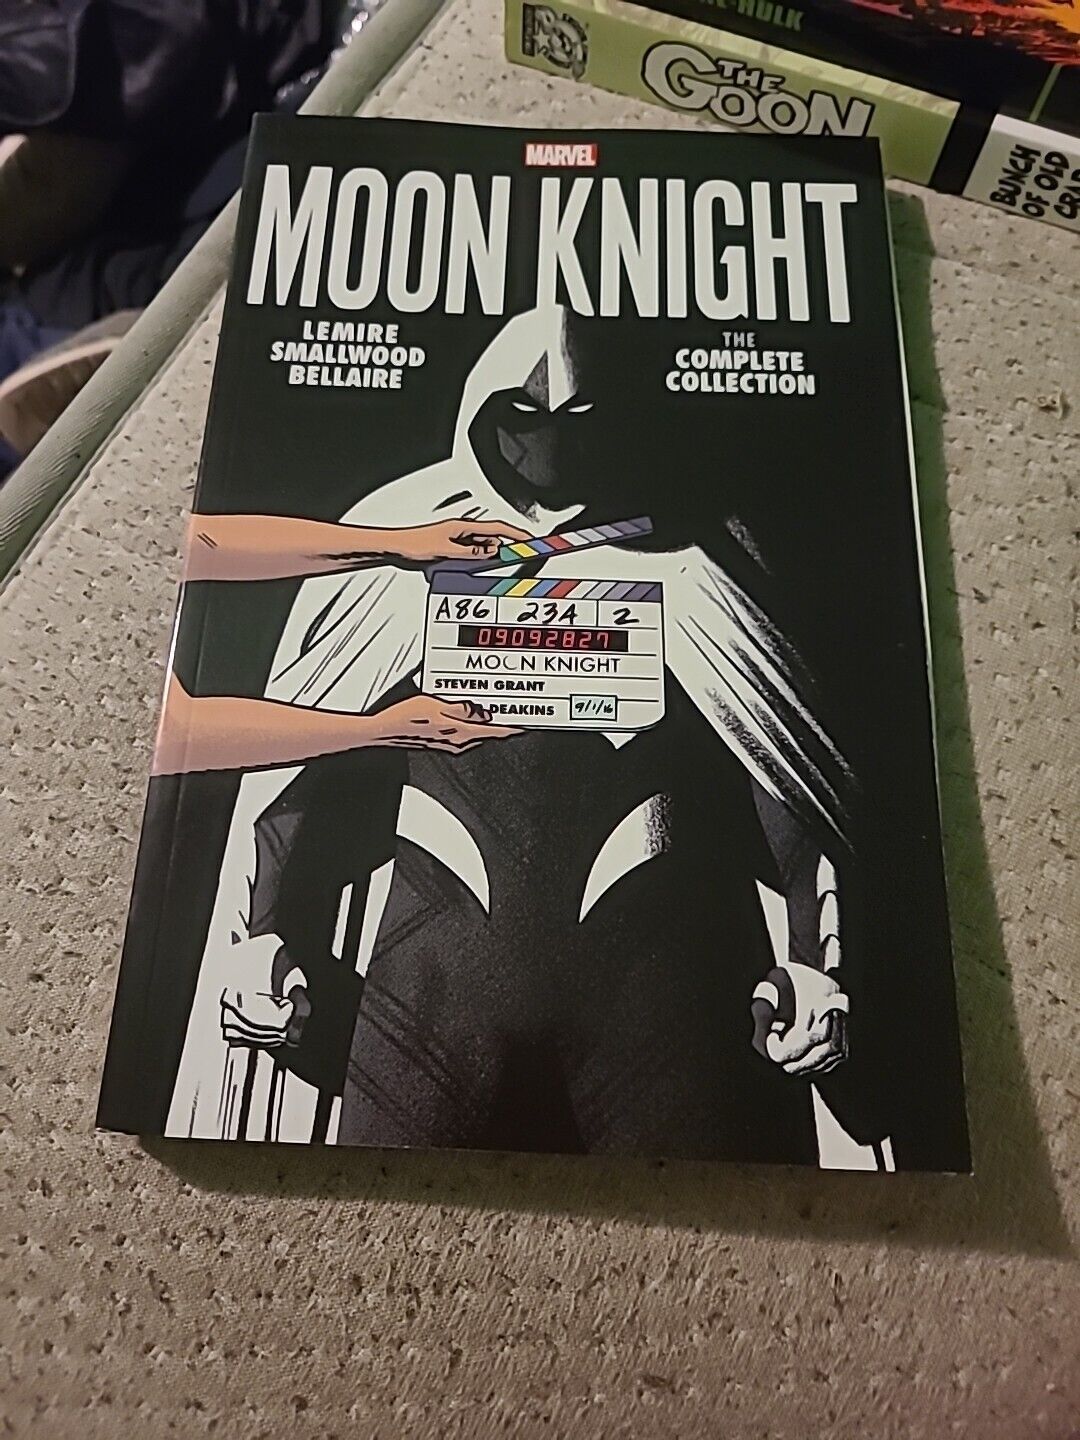 Marvel Moon Knight Lemire Smallwood Complete Collection Paperback Omnibus